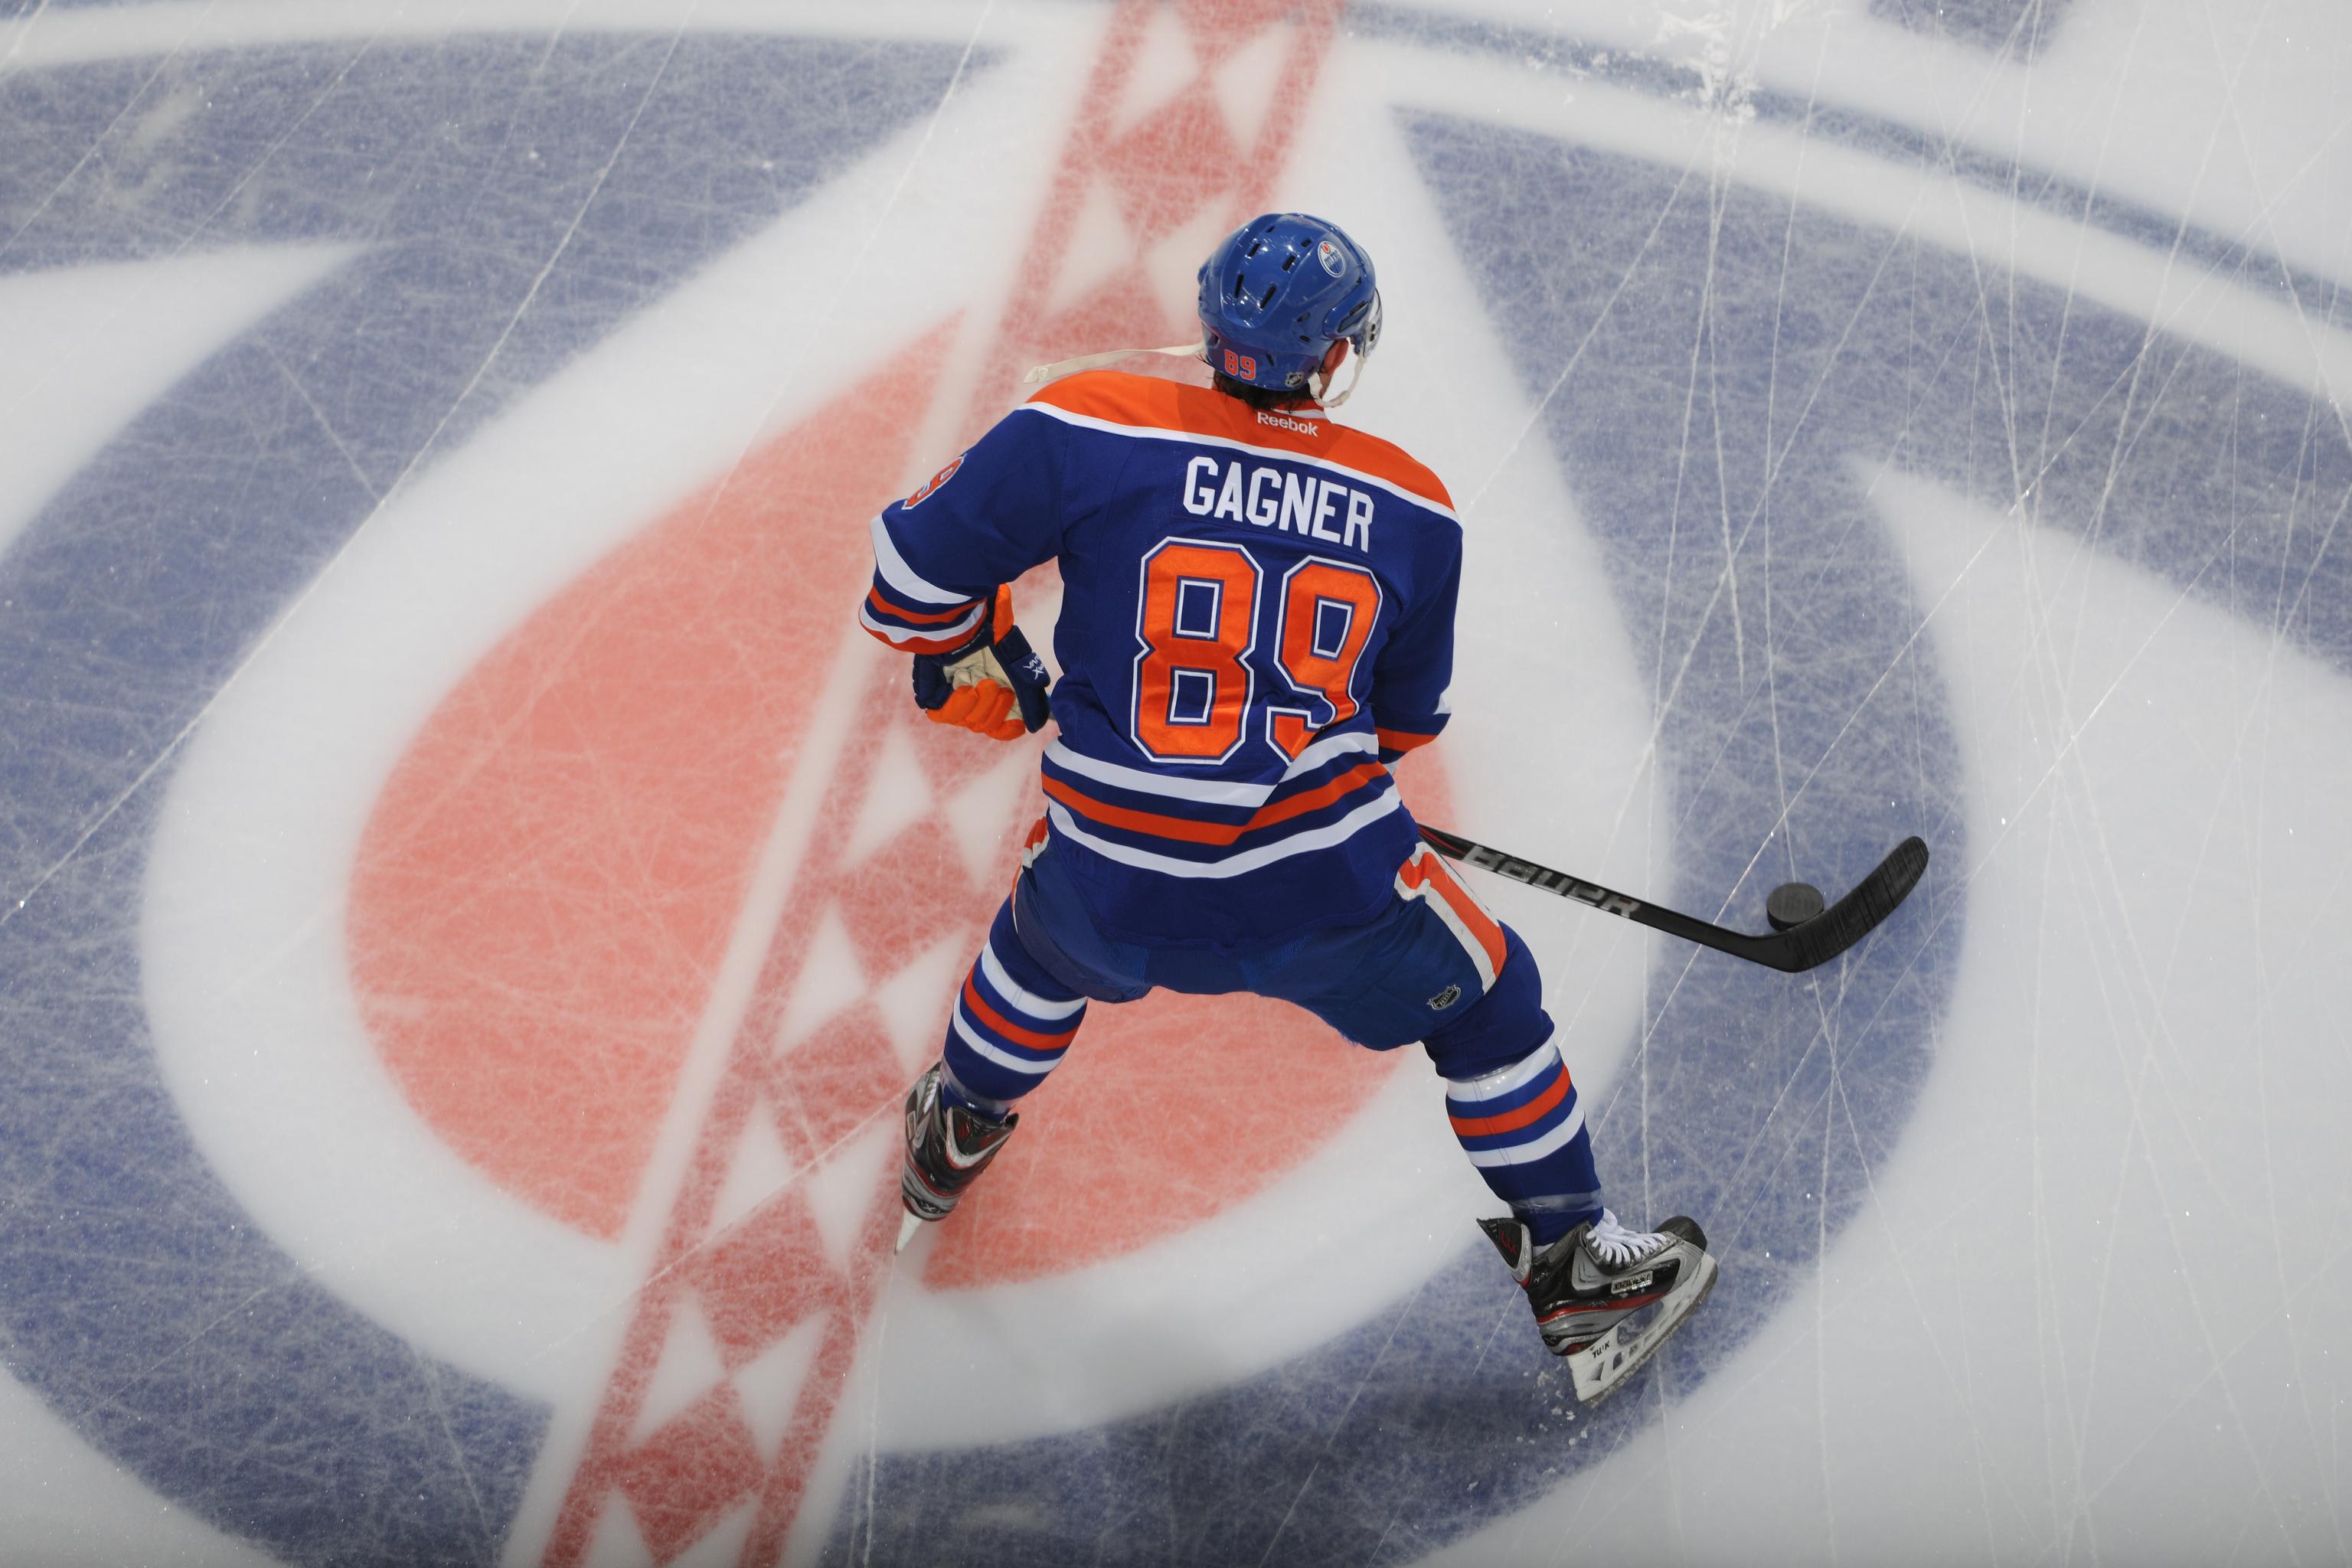 VIDEO: One-on-one with Sam Gagner of the Edmonton Oilers - The Hockey News